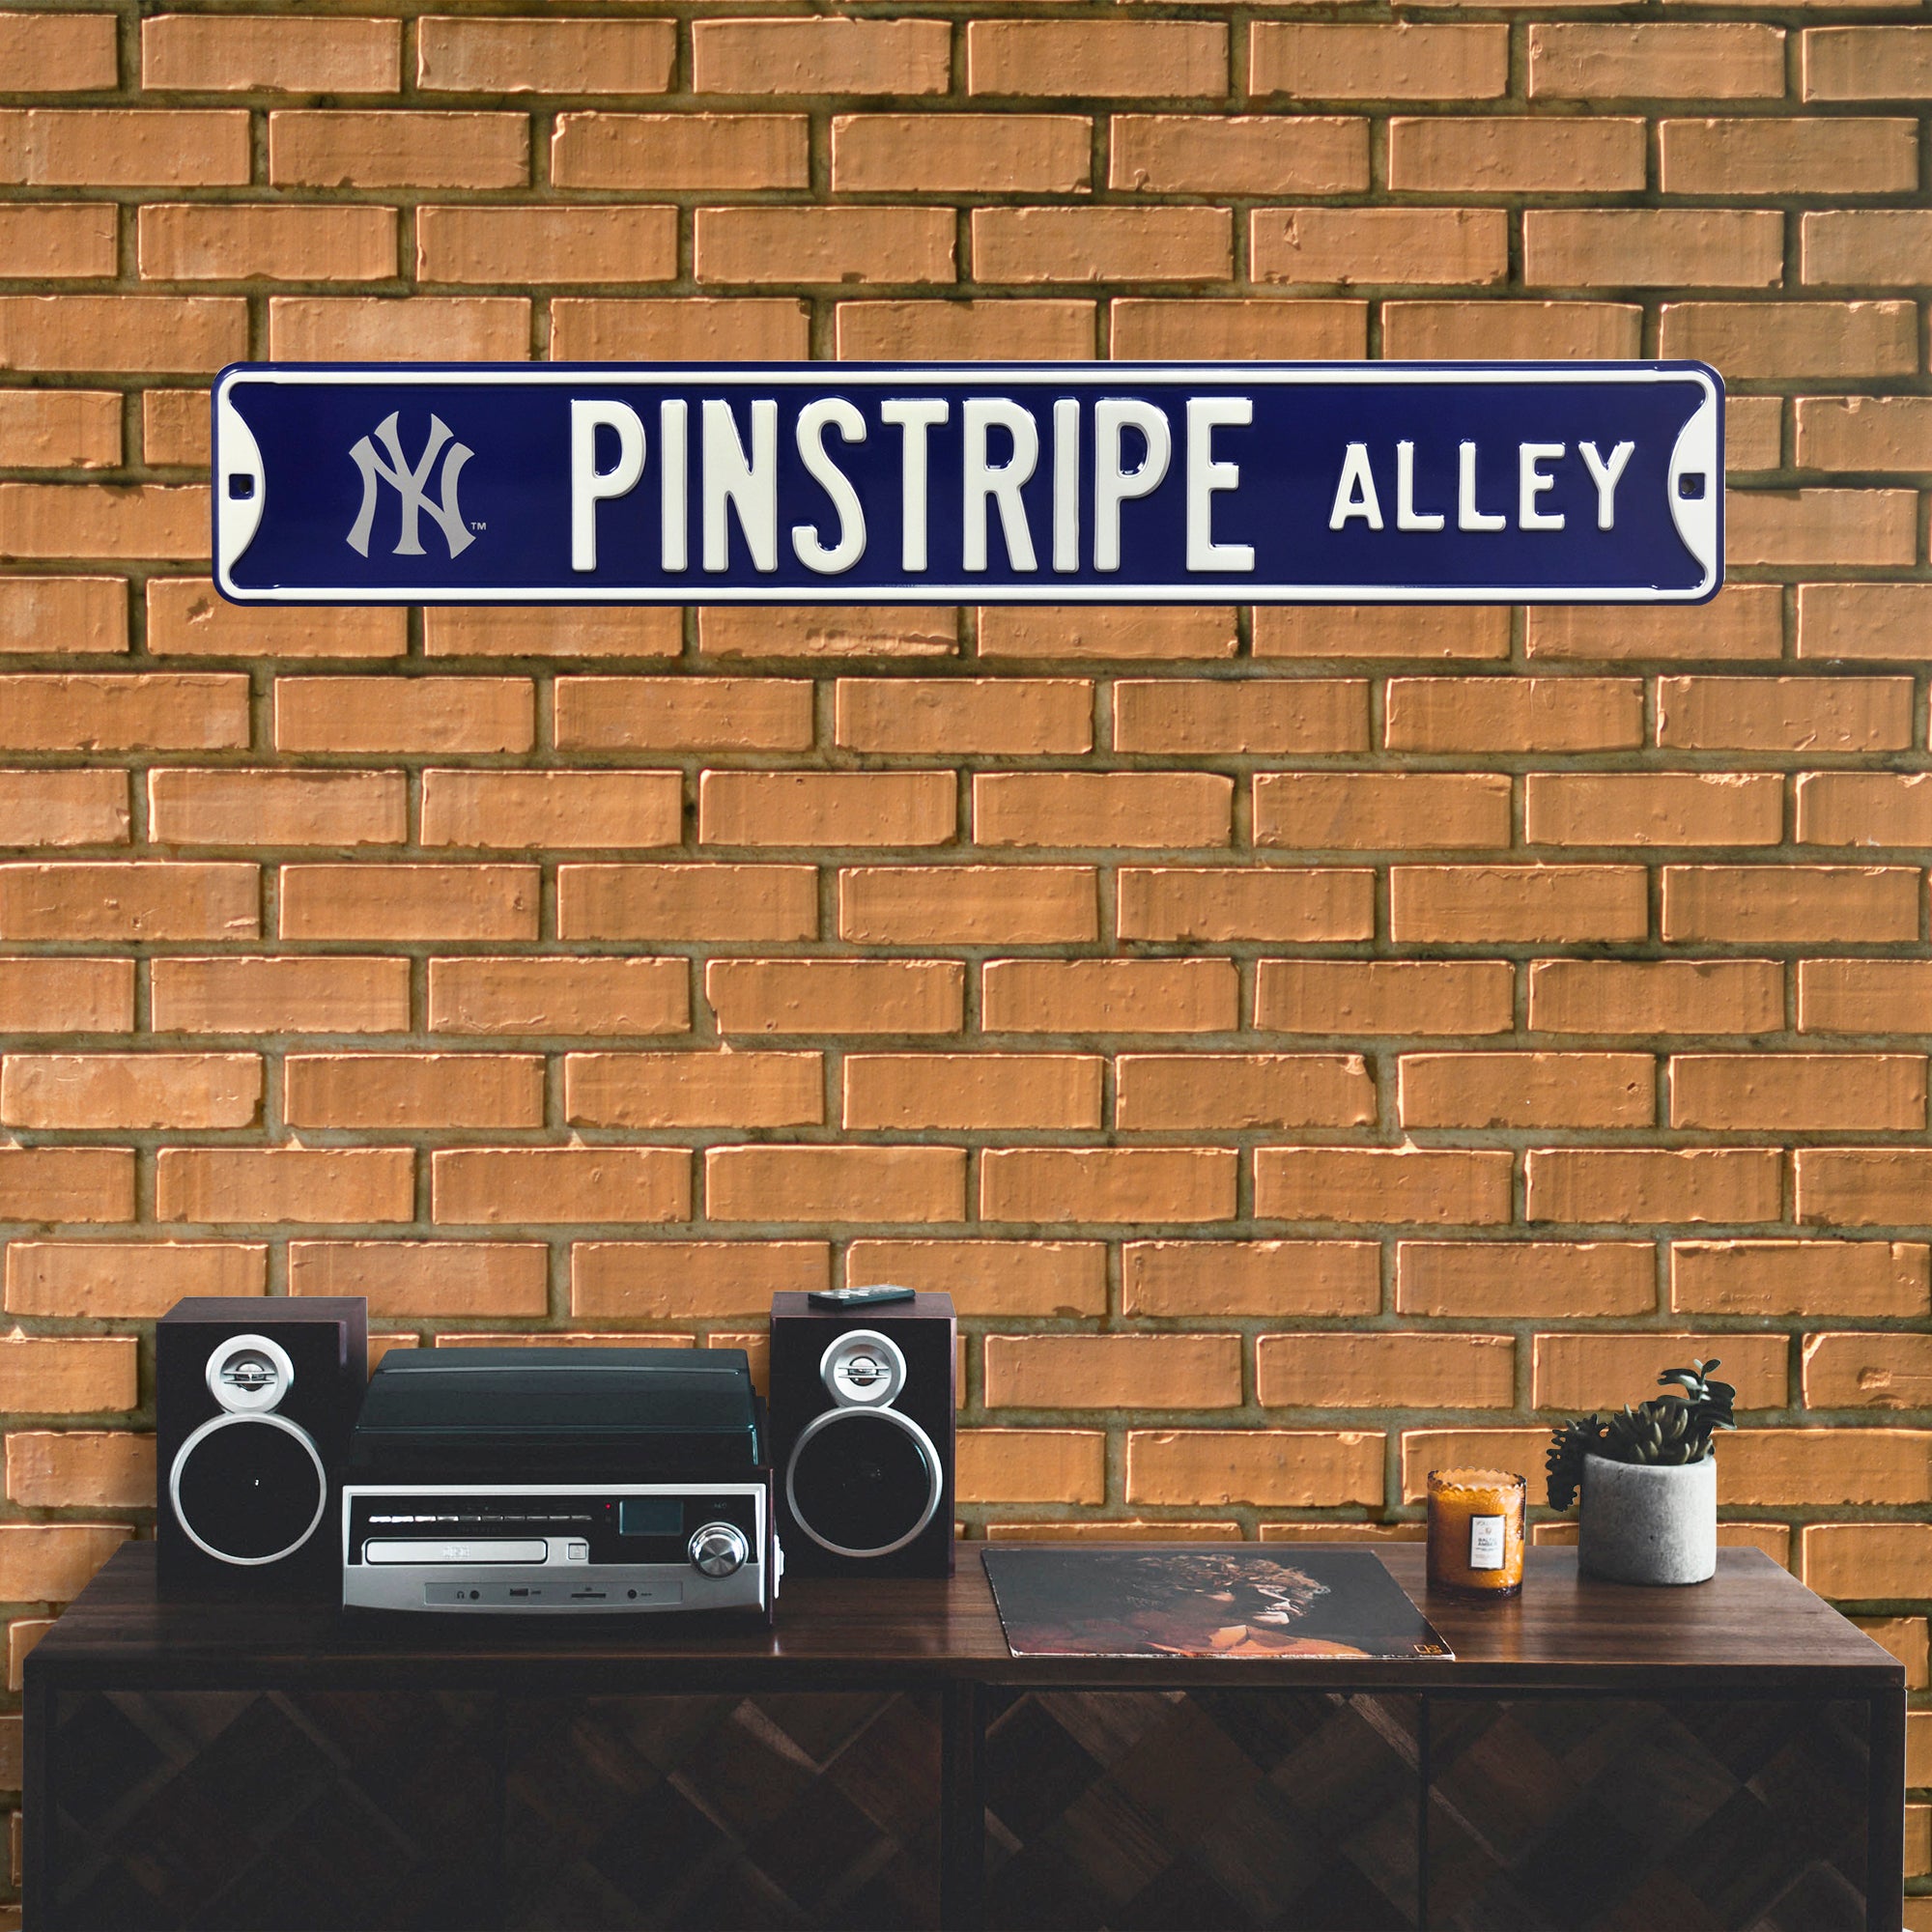 New York Yankees Steel Street Sign with Logo-PINSTRIPE ALLEY w/NY Logo 36" W x 6" H by Fathead